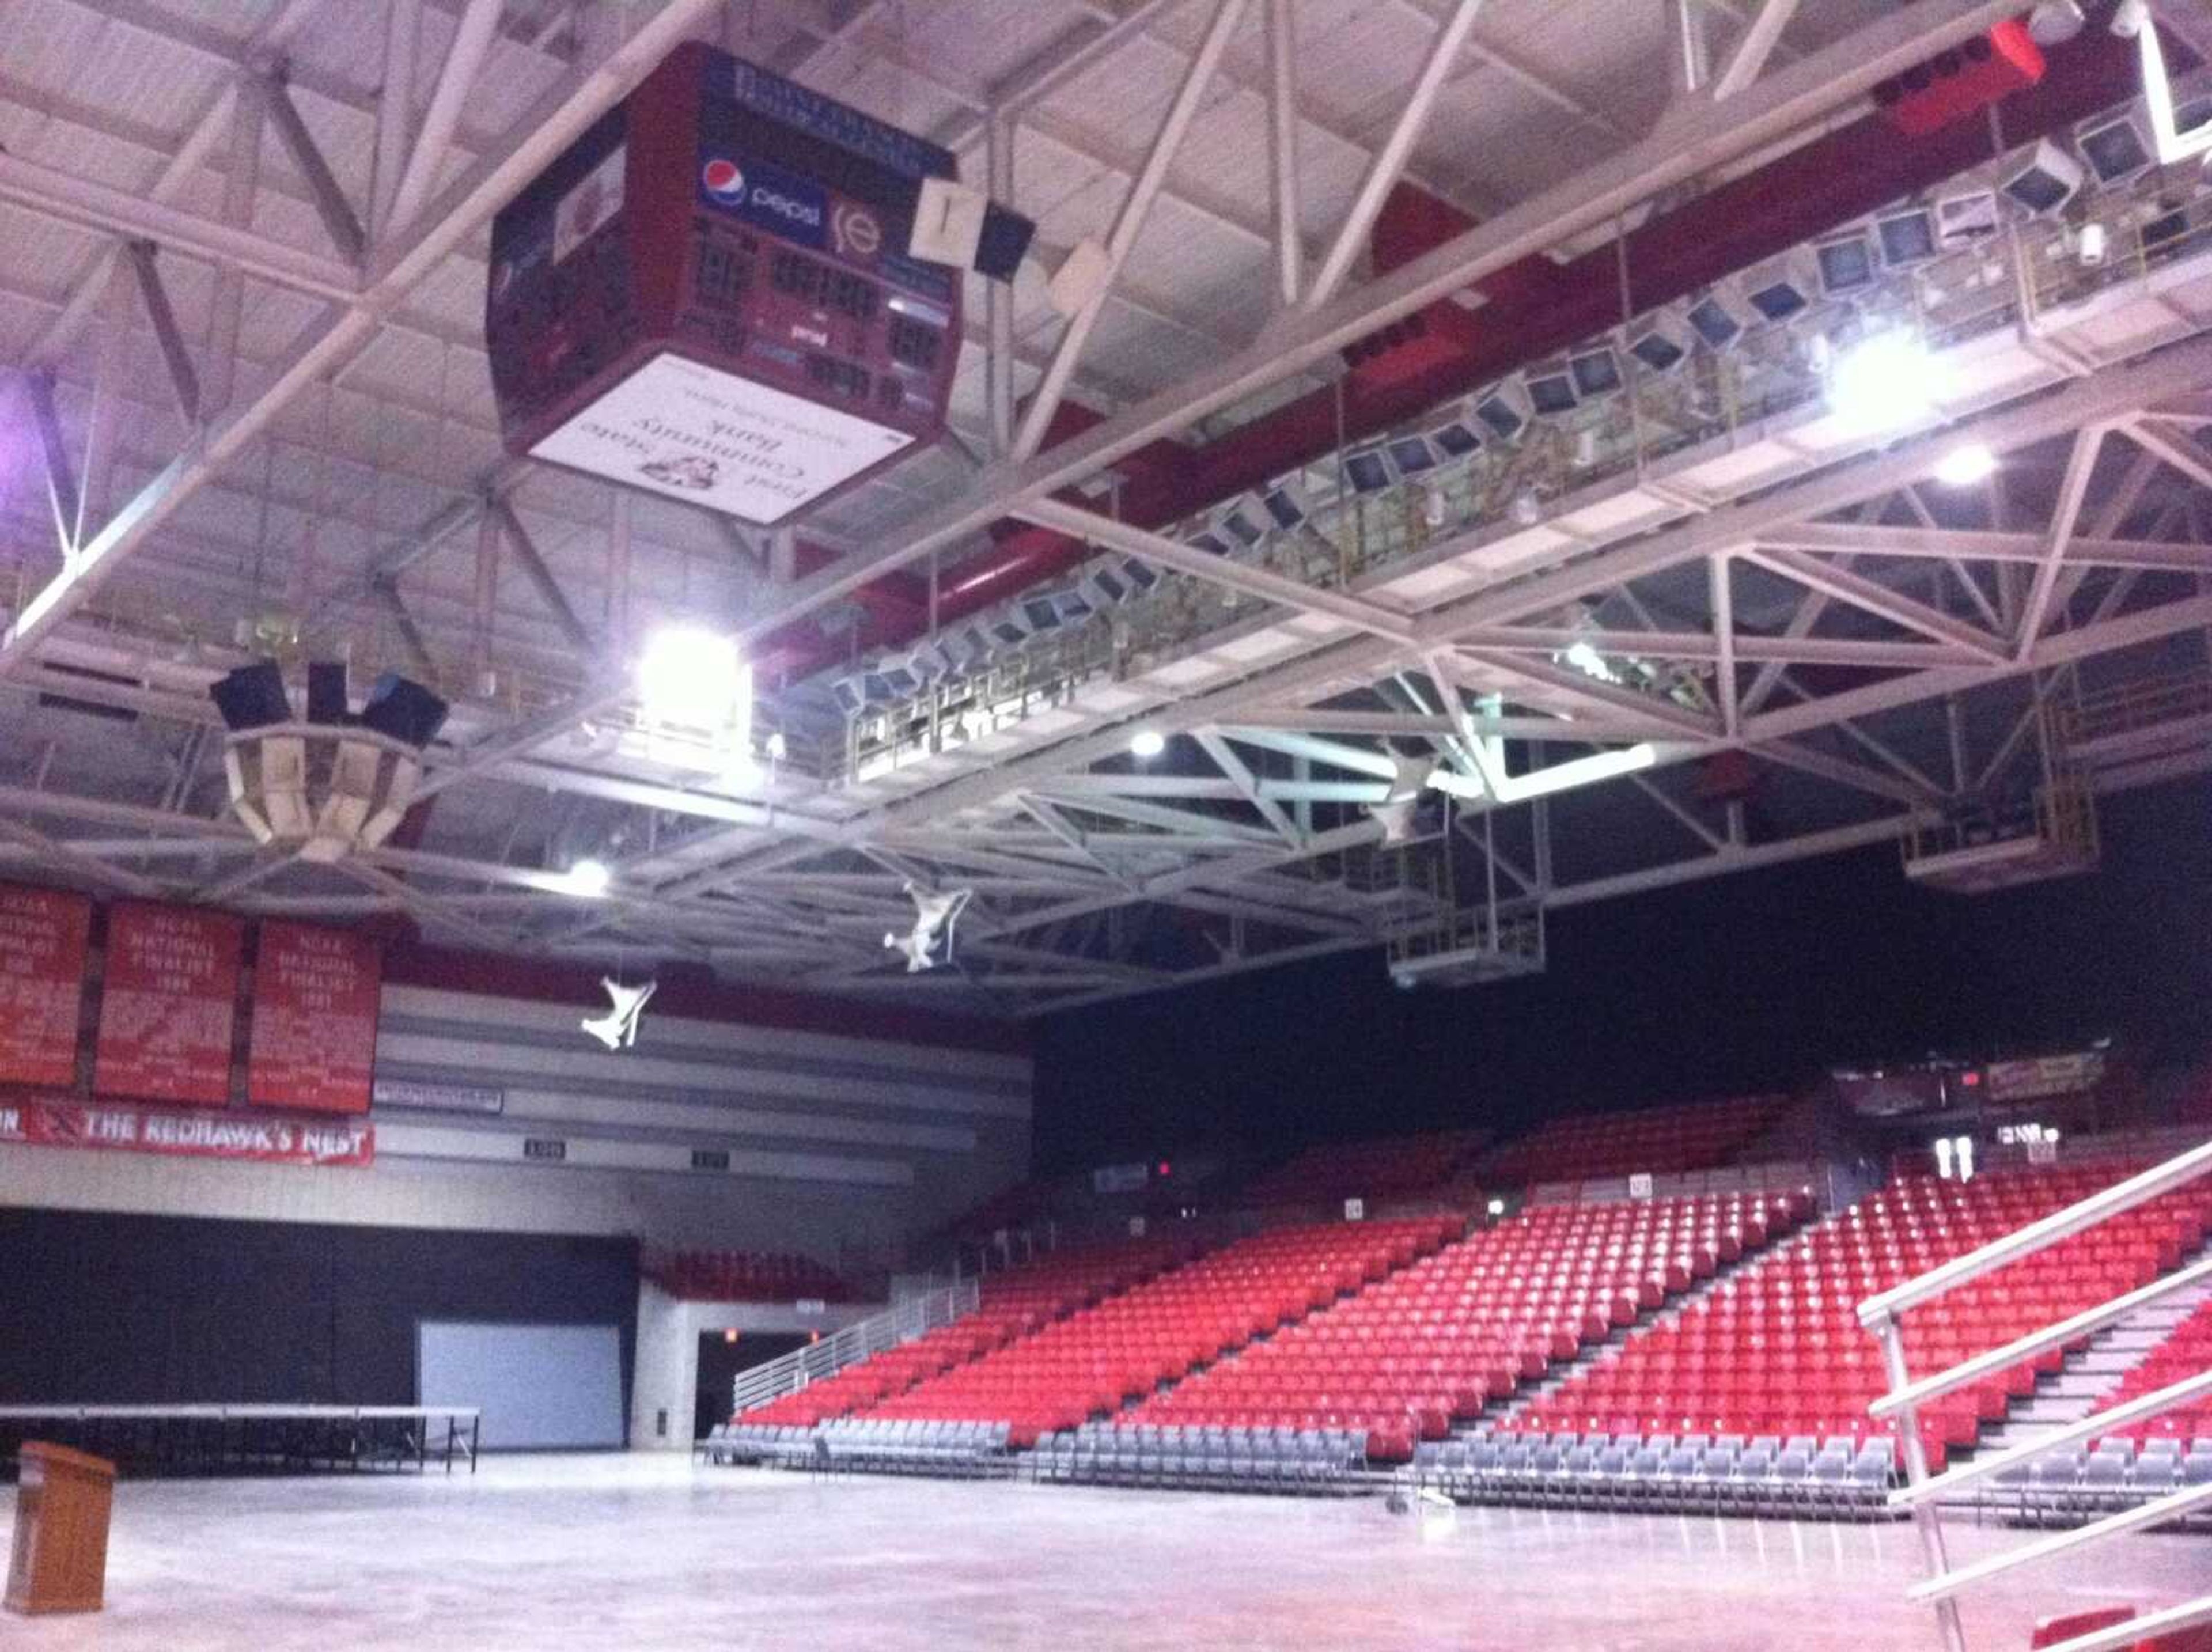 The Show Me Center Arena. Photo by Alyssa Brewer